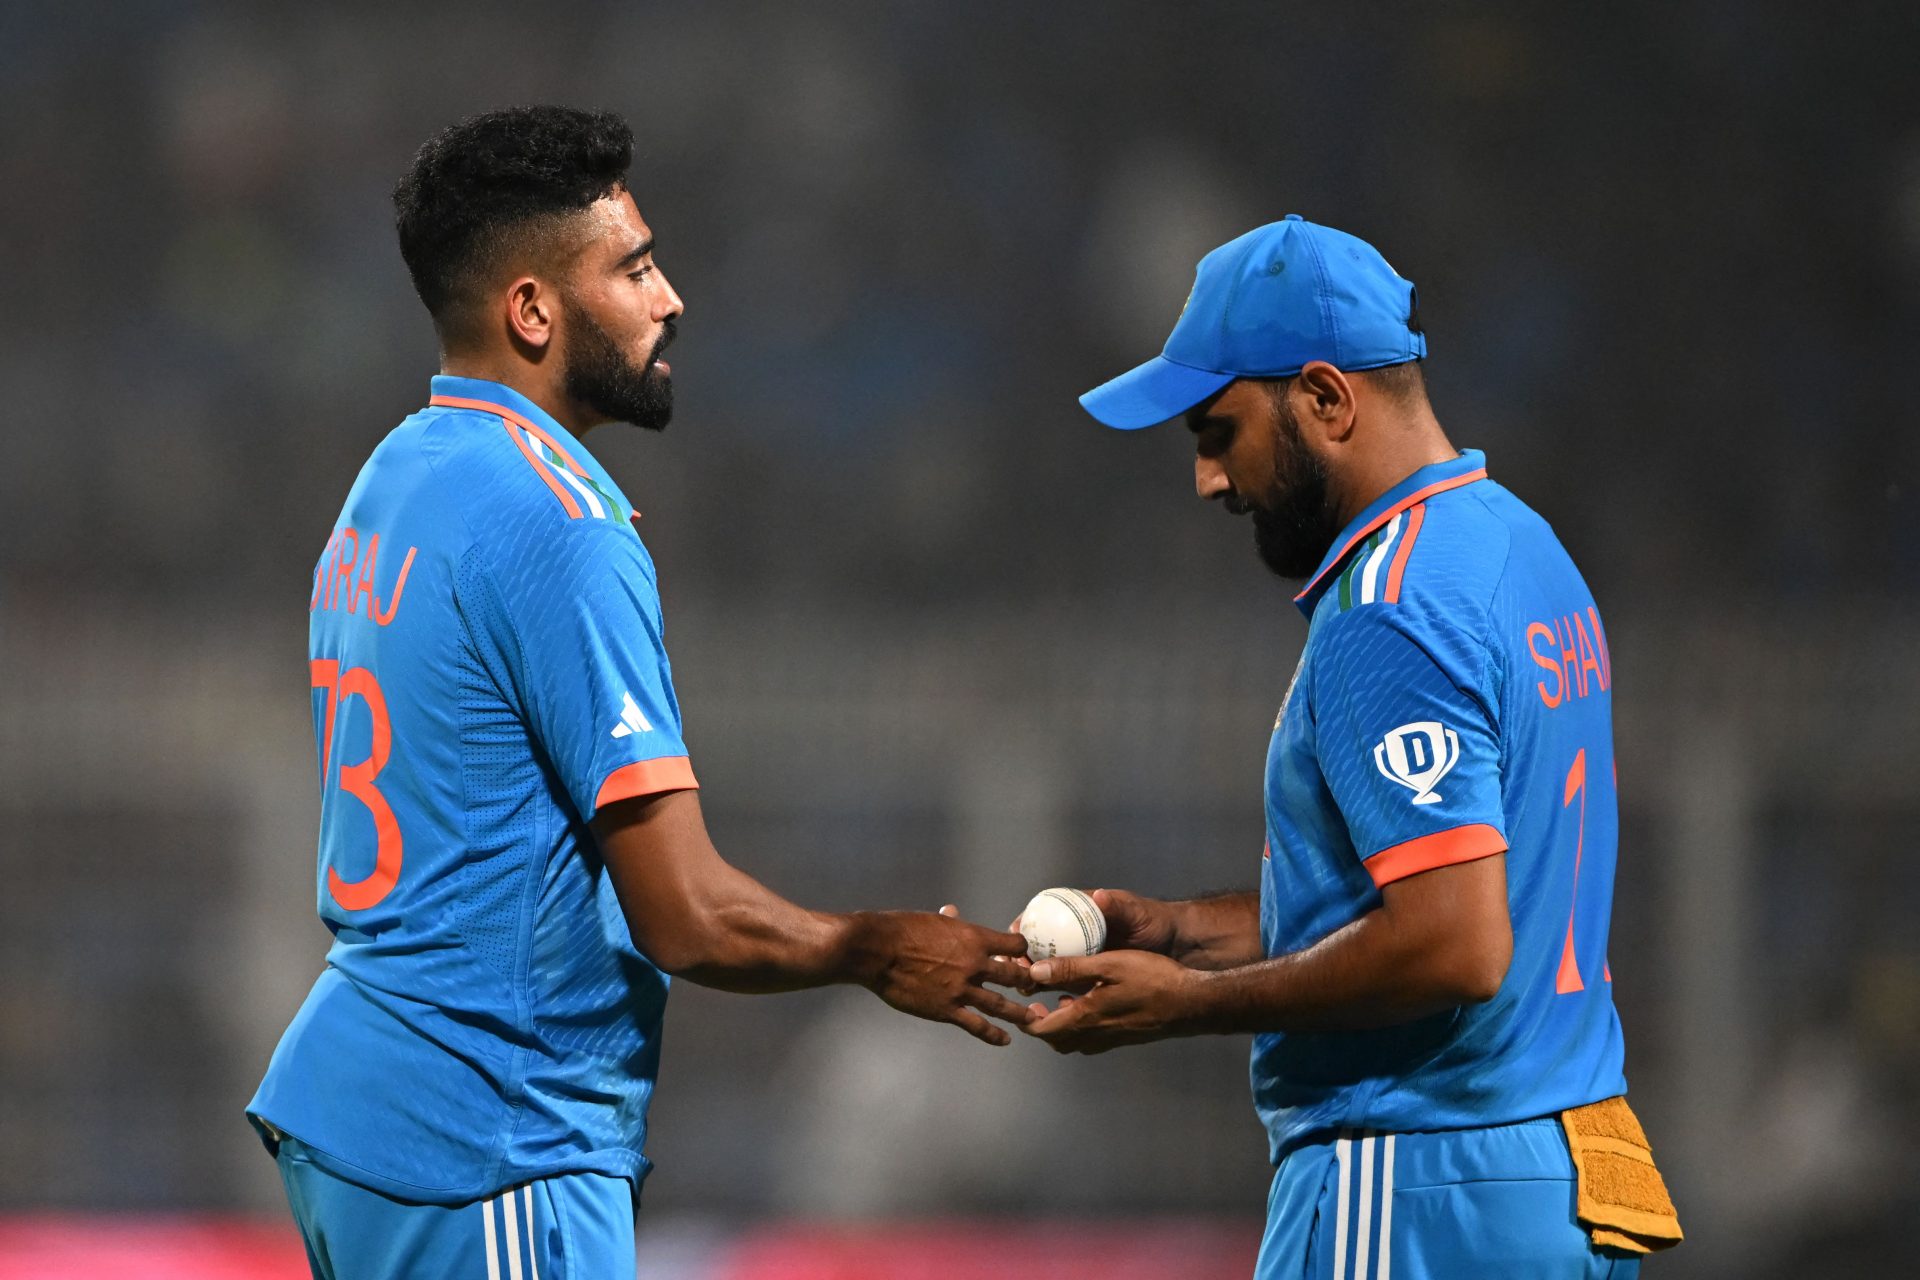 Shami, Bumrah and Siraj: How do they stack up to the best bowling groups of all time?